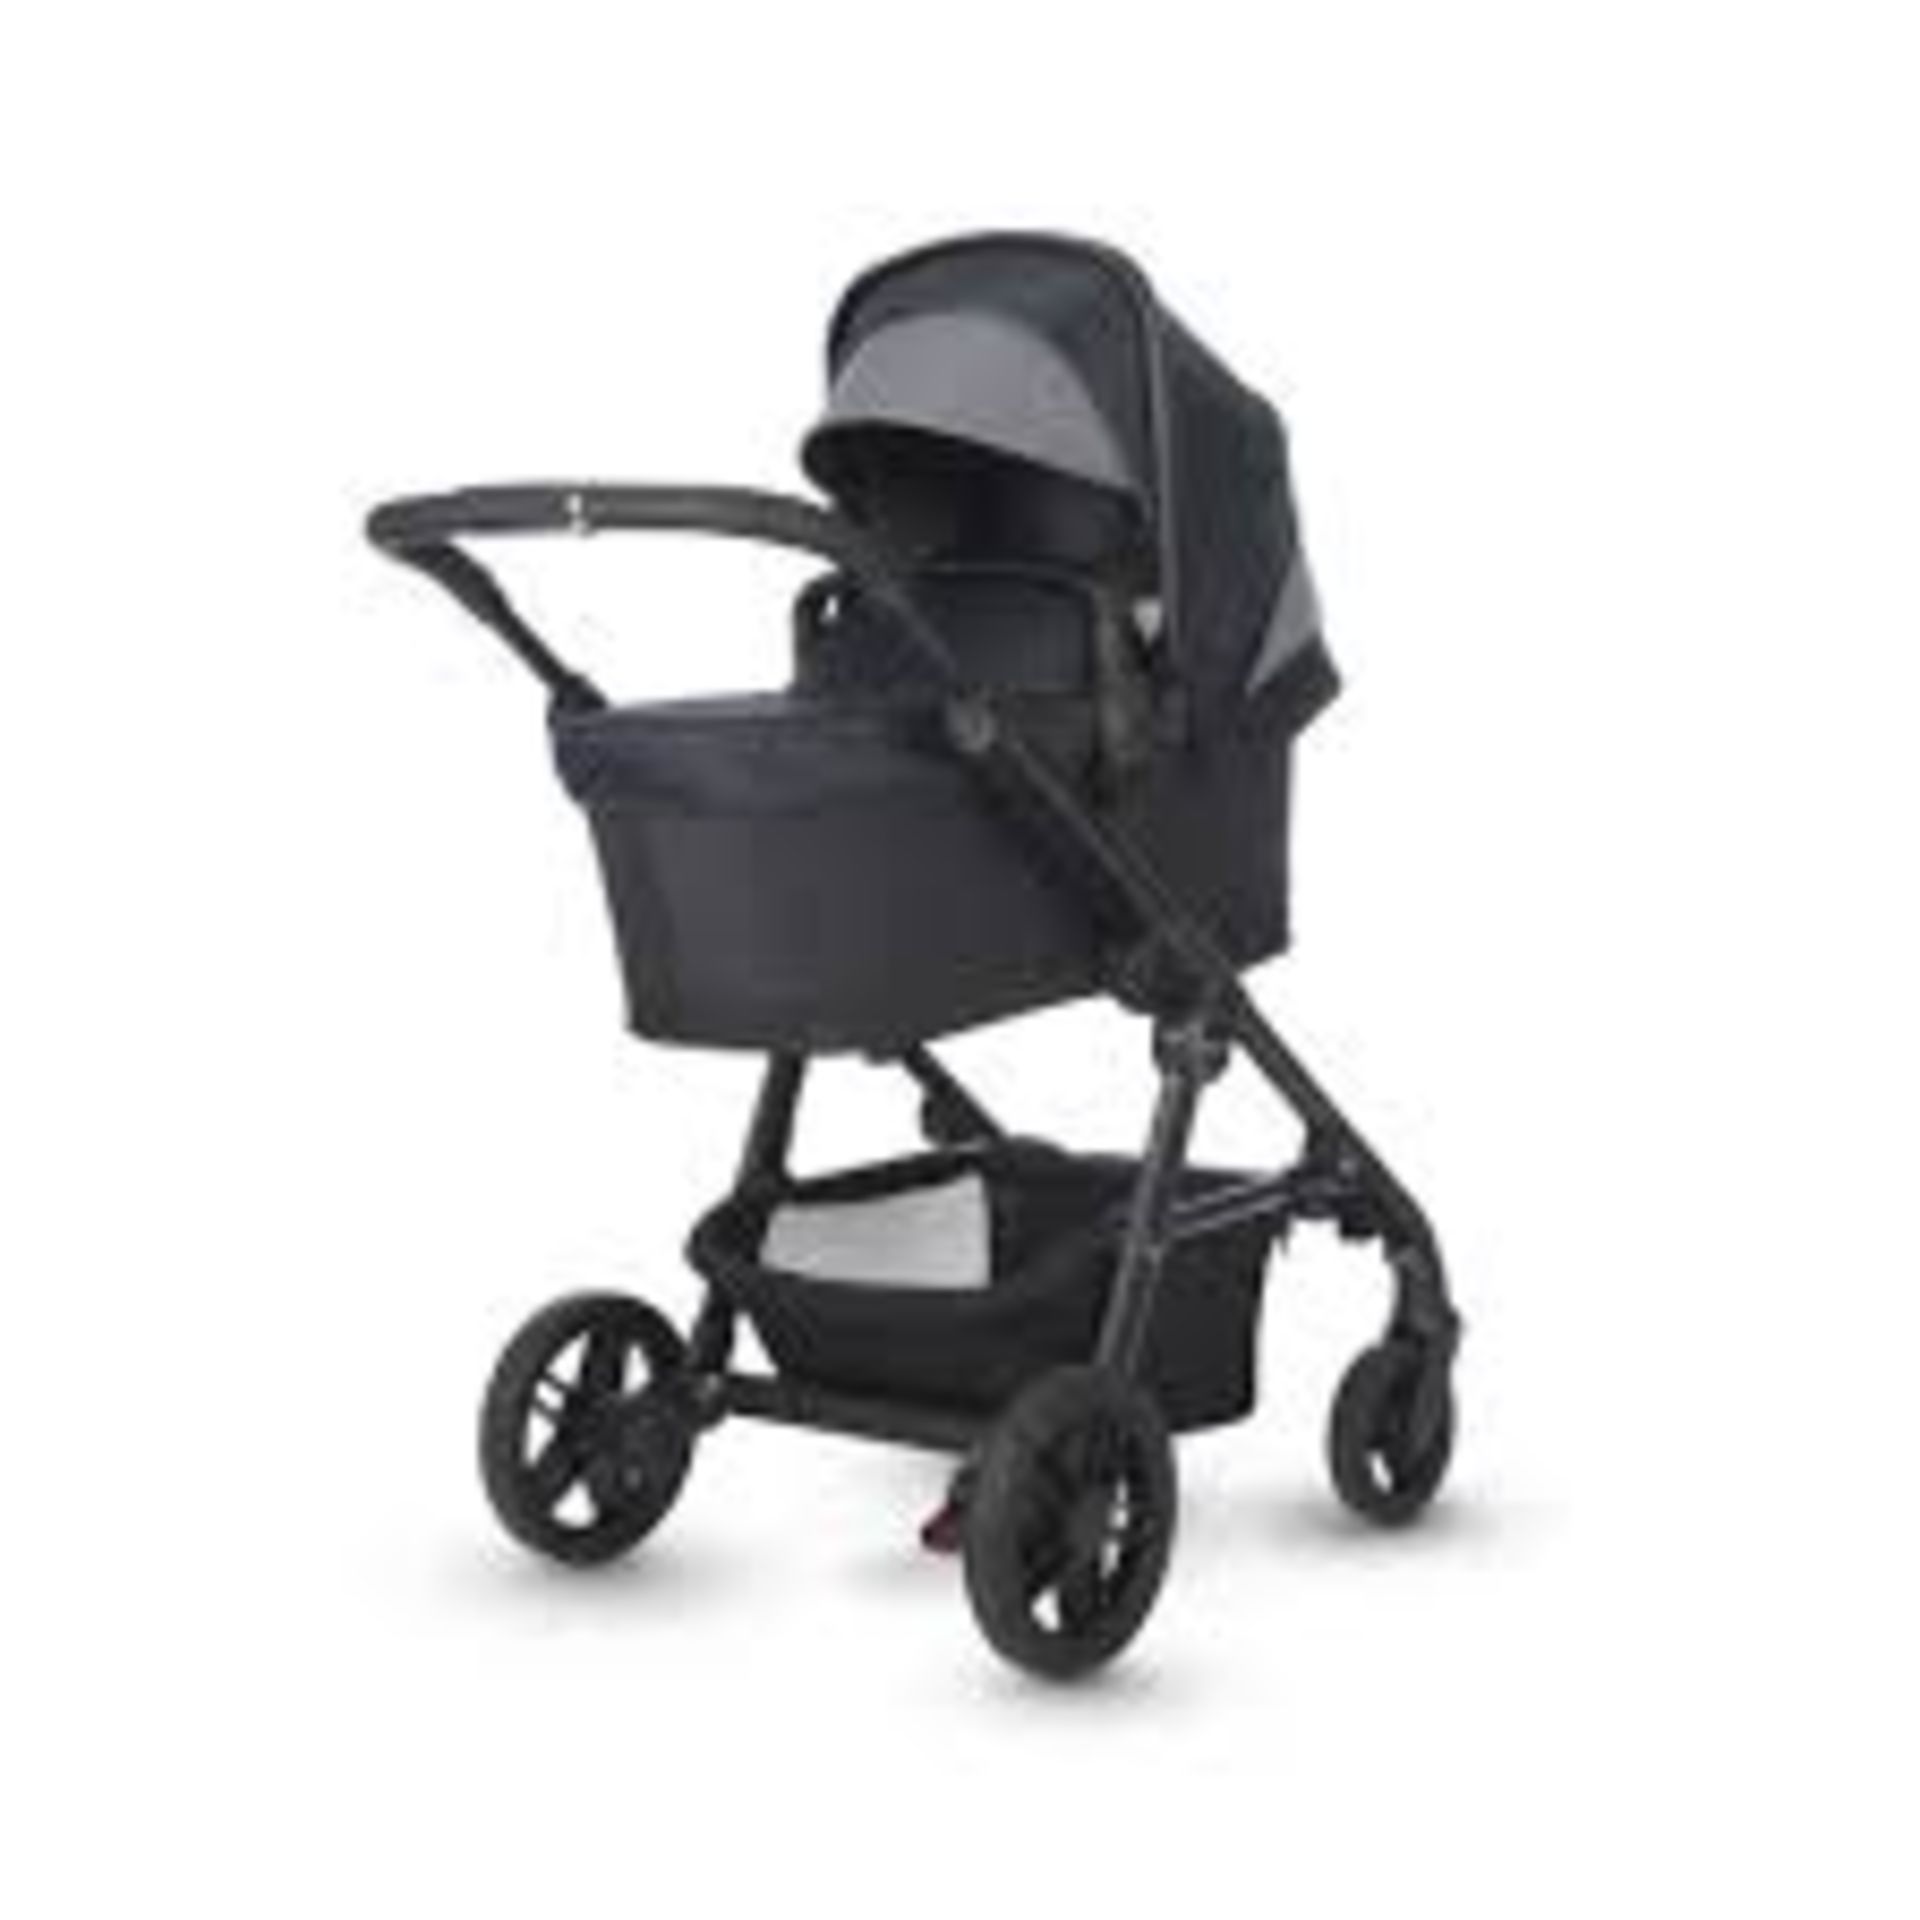 Boxed Silvercross Coast Infant Travel Solution Push Pram RRP £950 (1048399) (Appraisals Available On